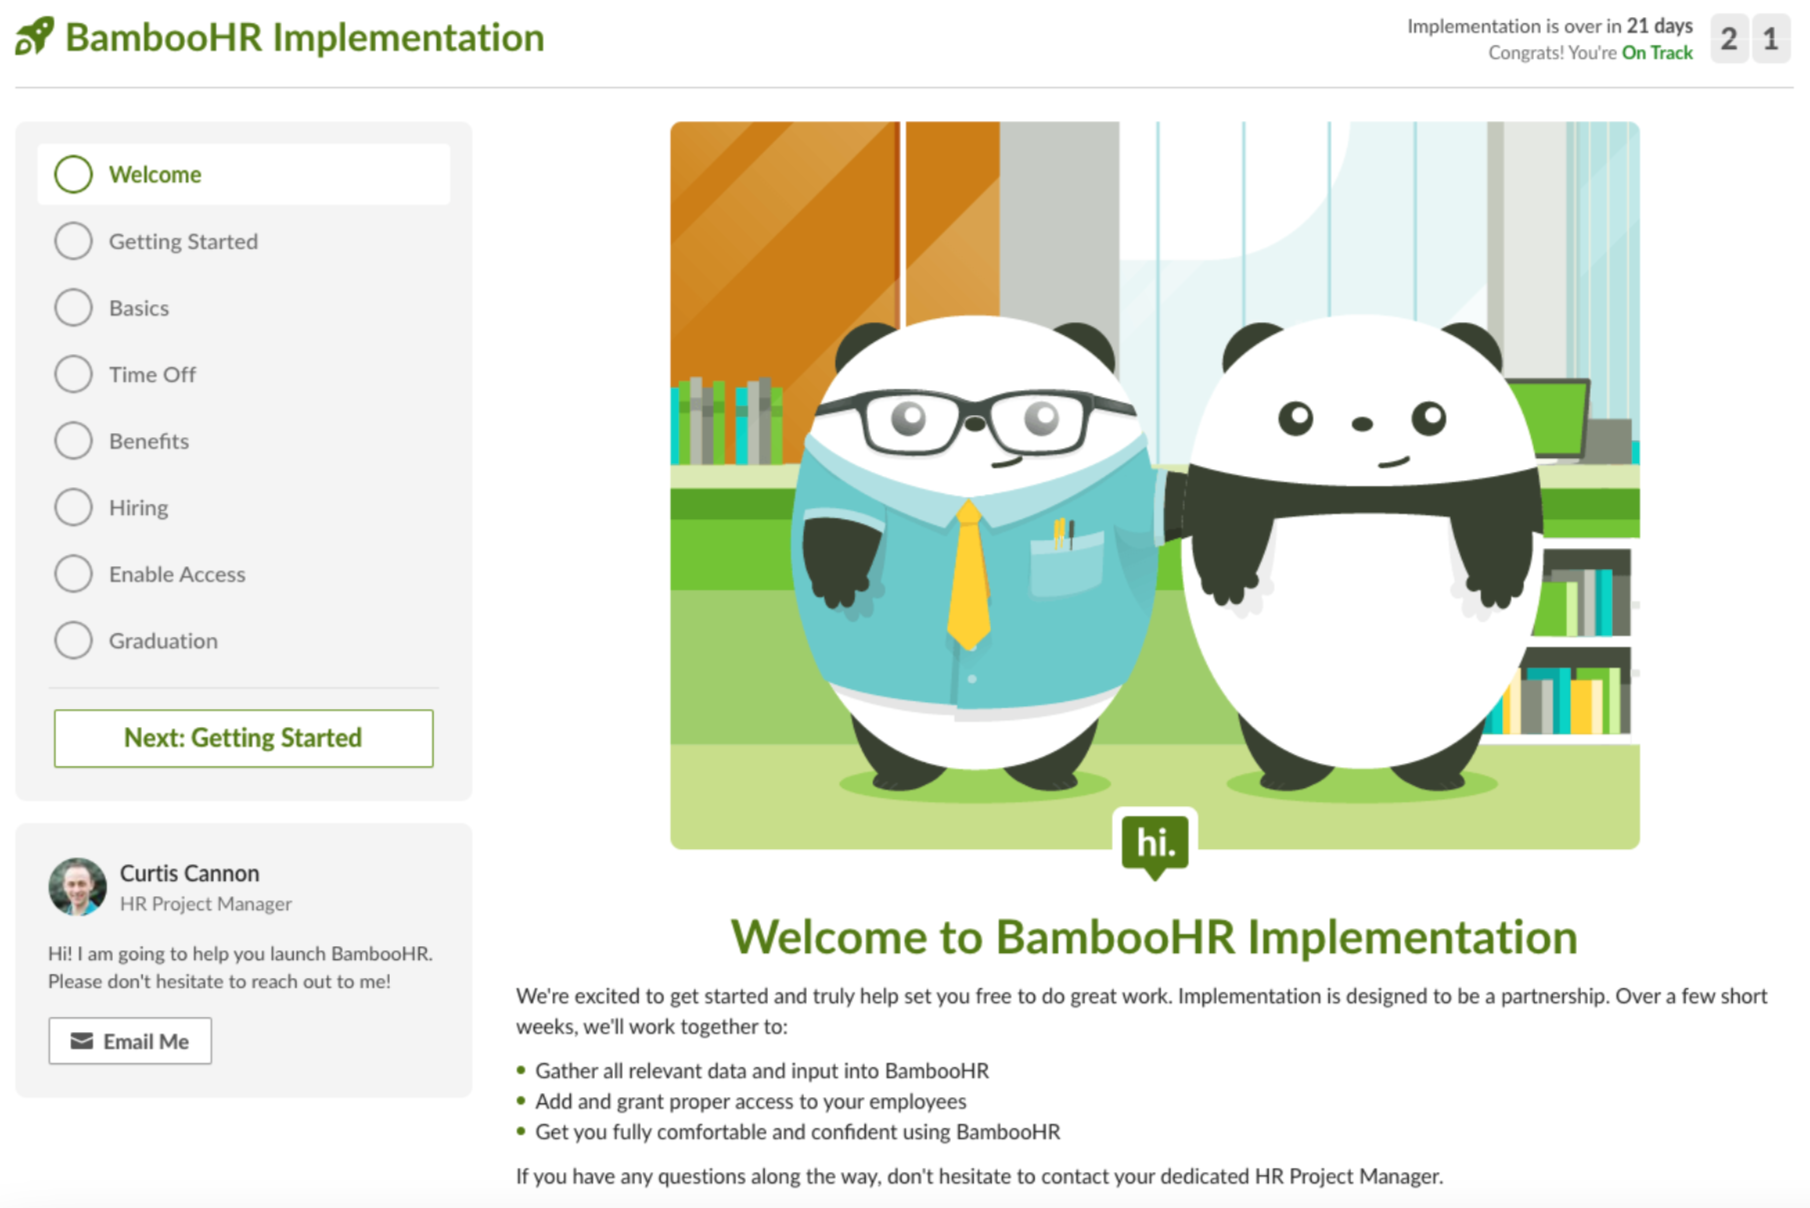 BambooHR Implementation